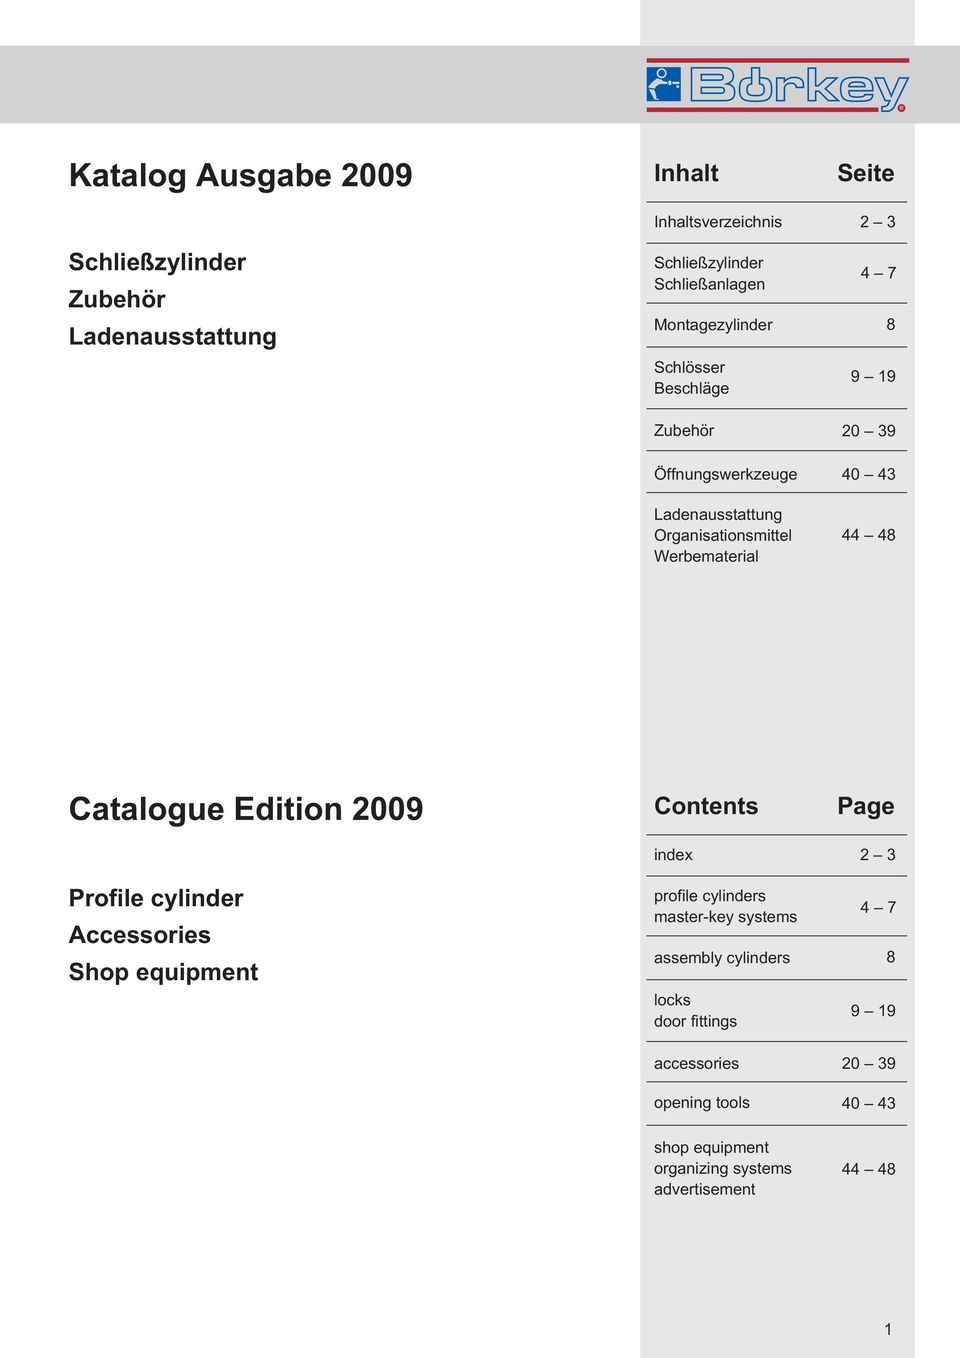 44 48 Catalogue Edition 2009 Contents Page index 2 3 Profile cylinder Accessories Shop equipment profile cylinders master-key systems